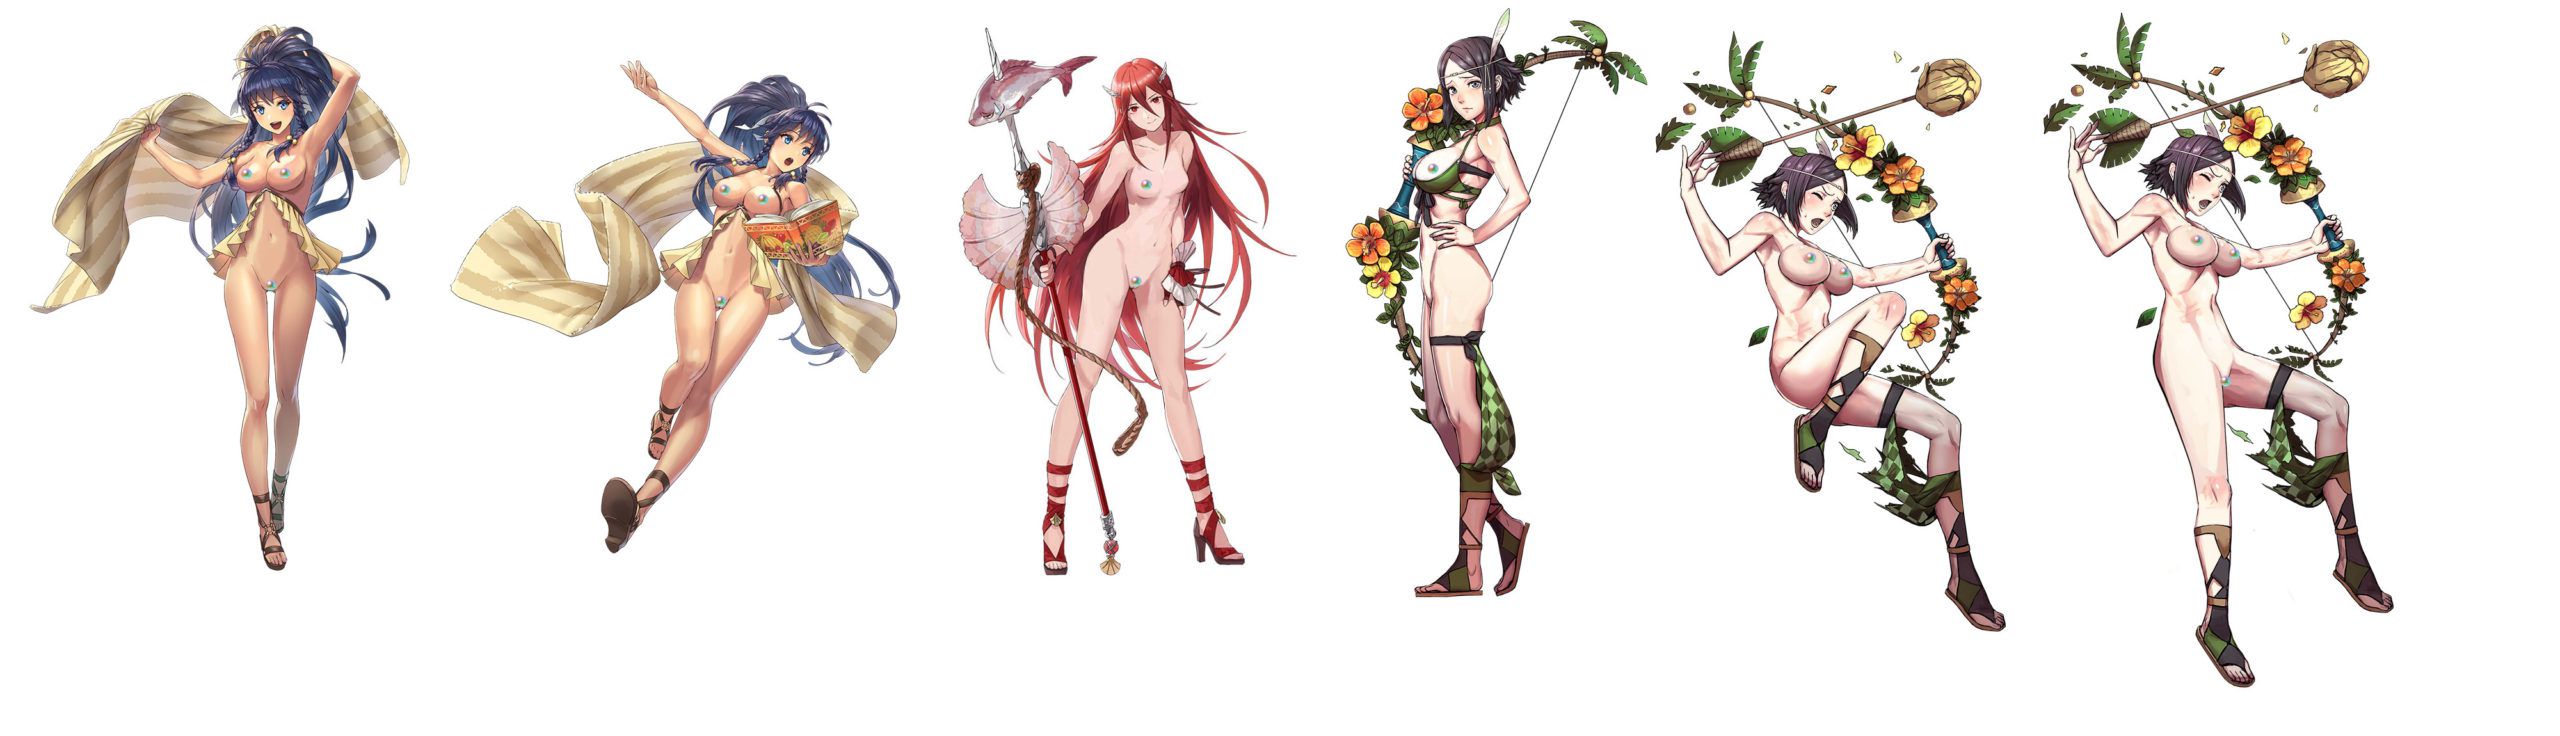 [Fire 厶 Brem Heroes] FEH Stripping Cola Summary Part 7 32